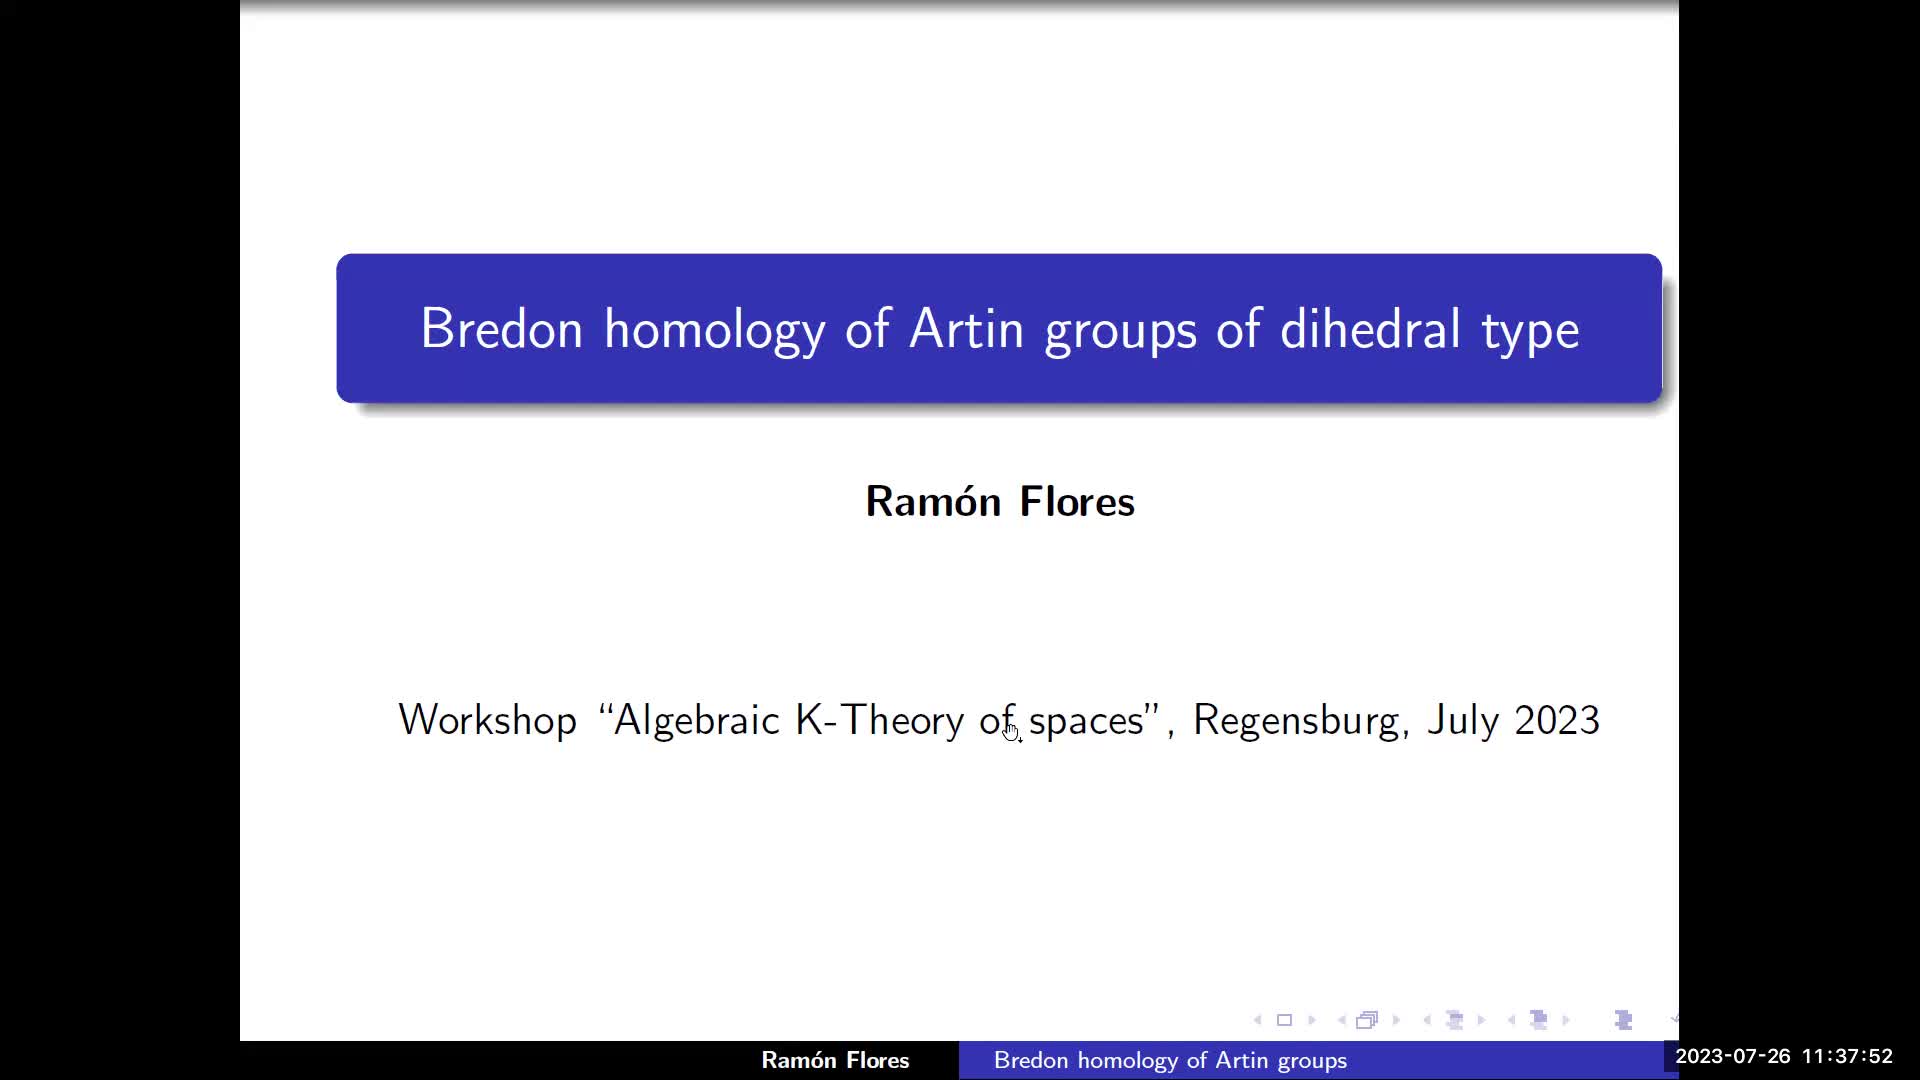 Ramon Flores: Bredon homology and K-theory for Artin groups of dihedral type